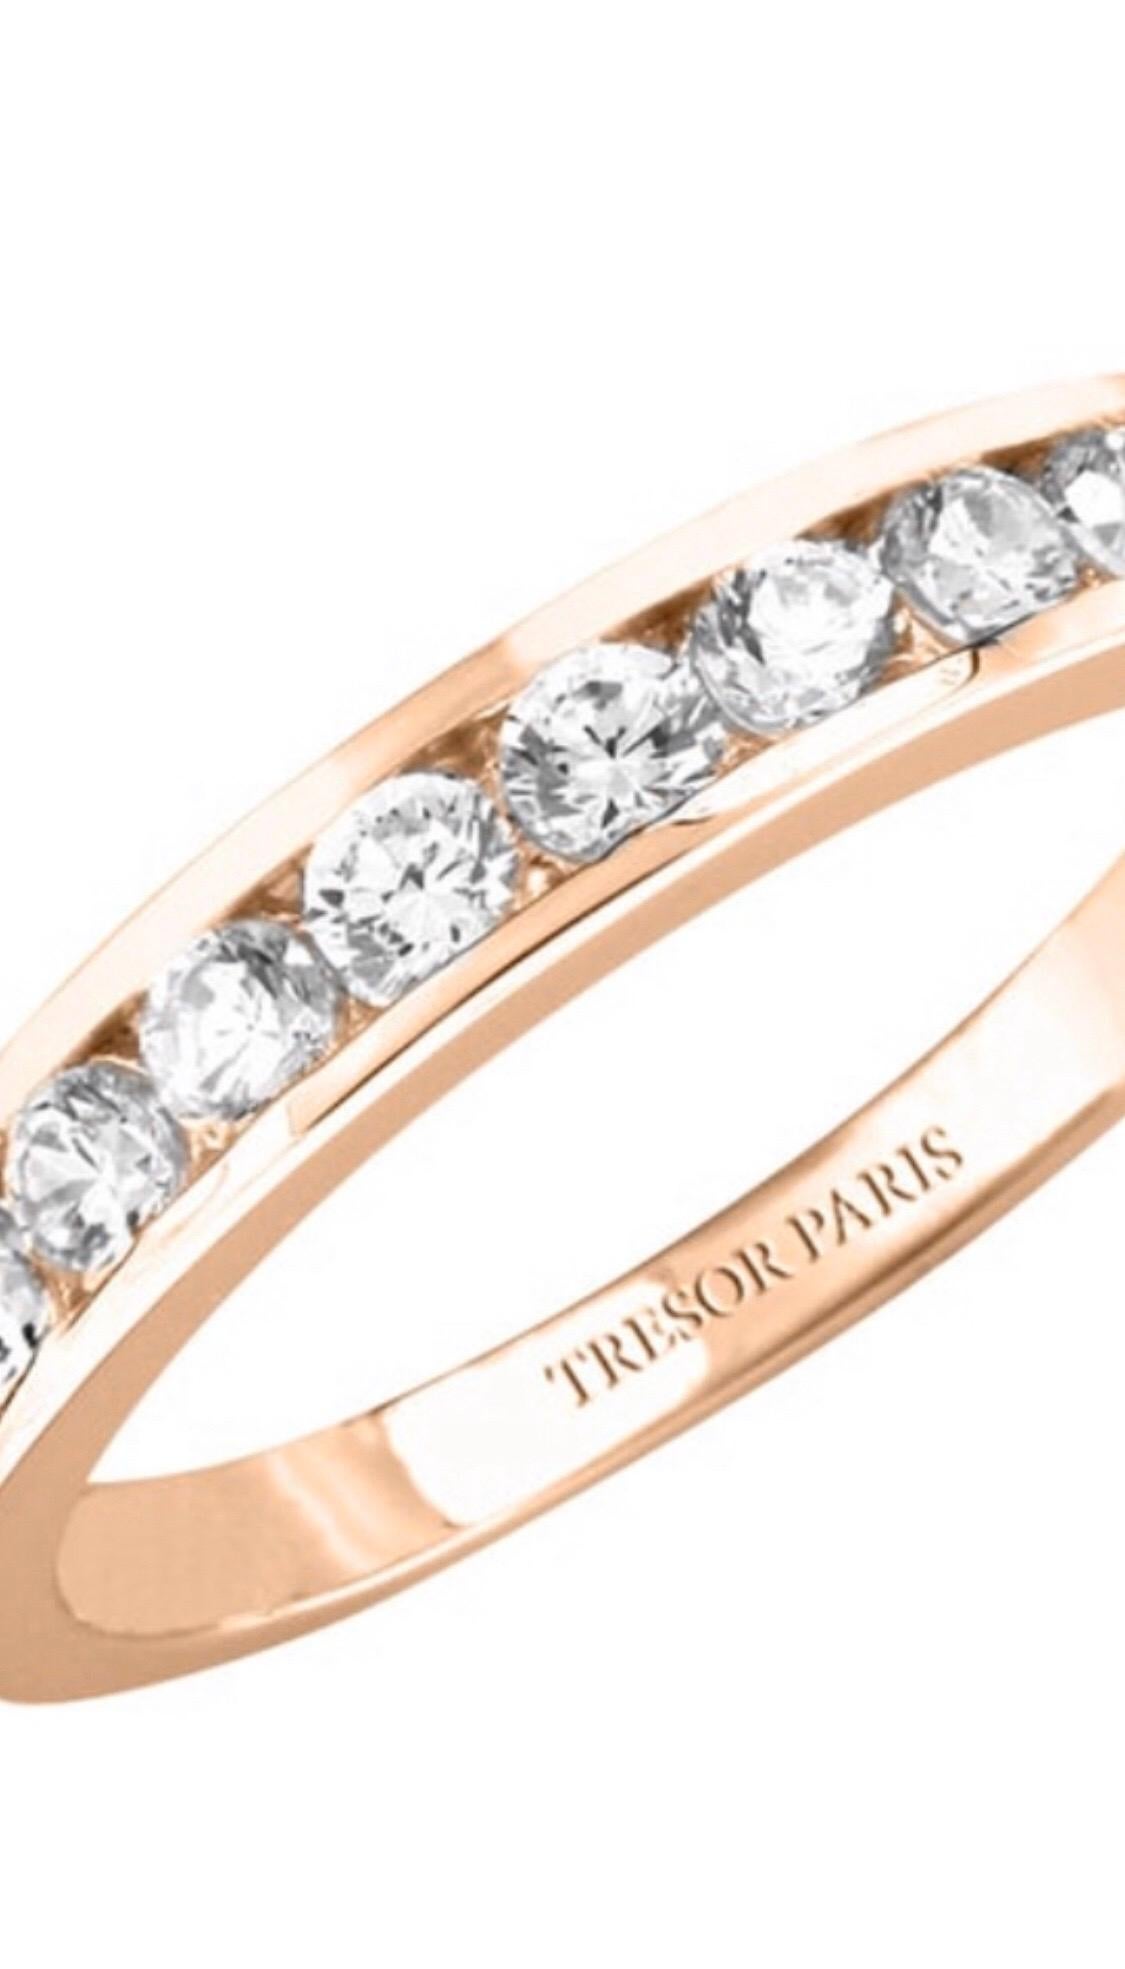 This Channel Set 18 Karat Rose Gold half Eternity ring is an exquisite addition to our collection. A sparkling array of nine H-SI1 Round Brilliant Diamonds for a classic and iconic look. This ring has a total Diamond weight of 0.25 Carats, the